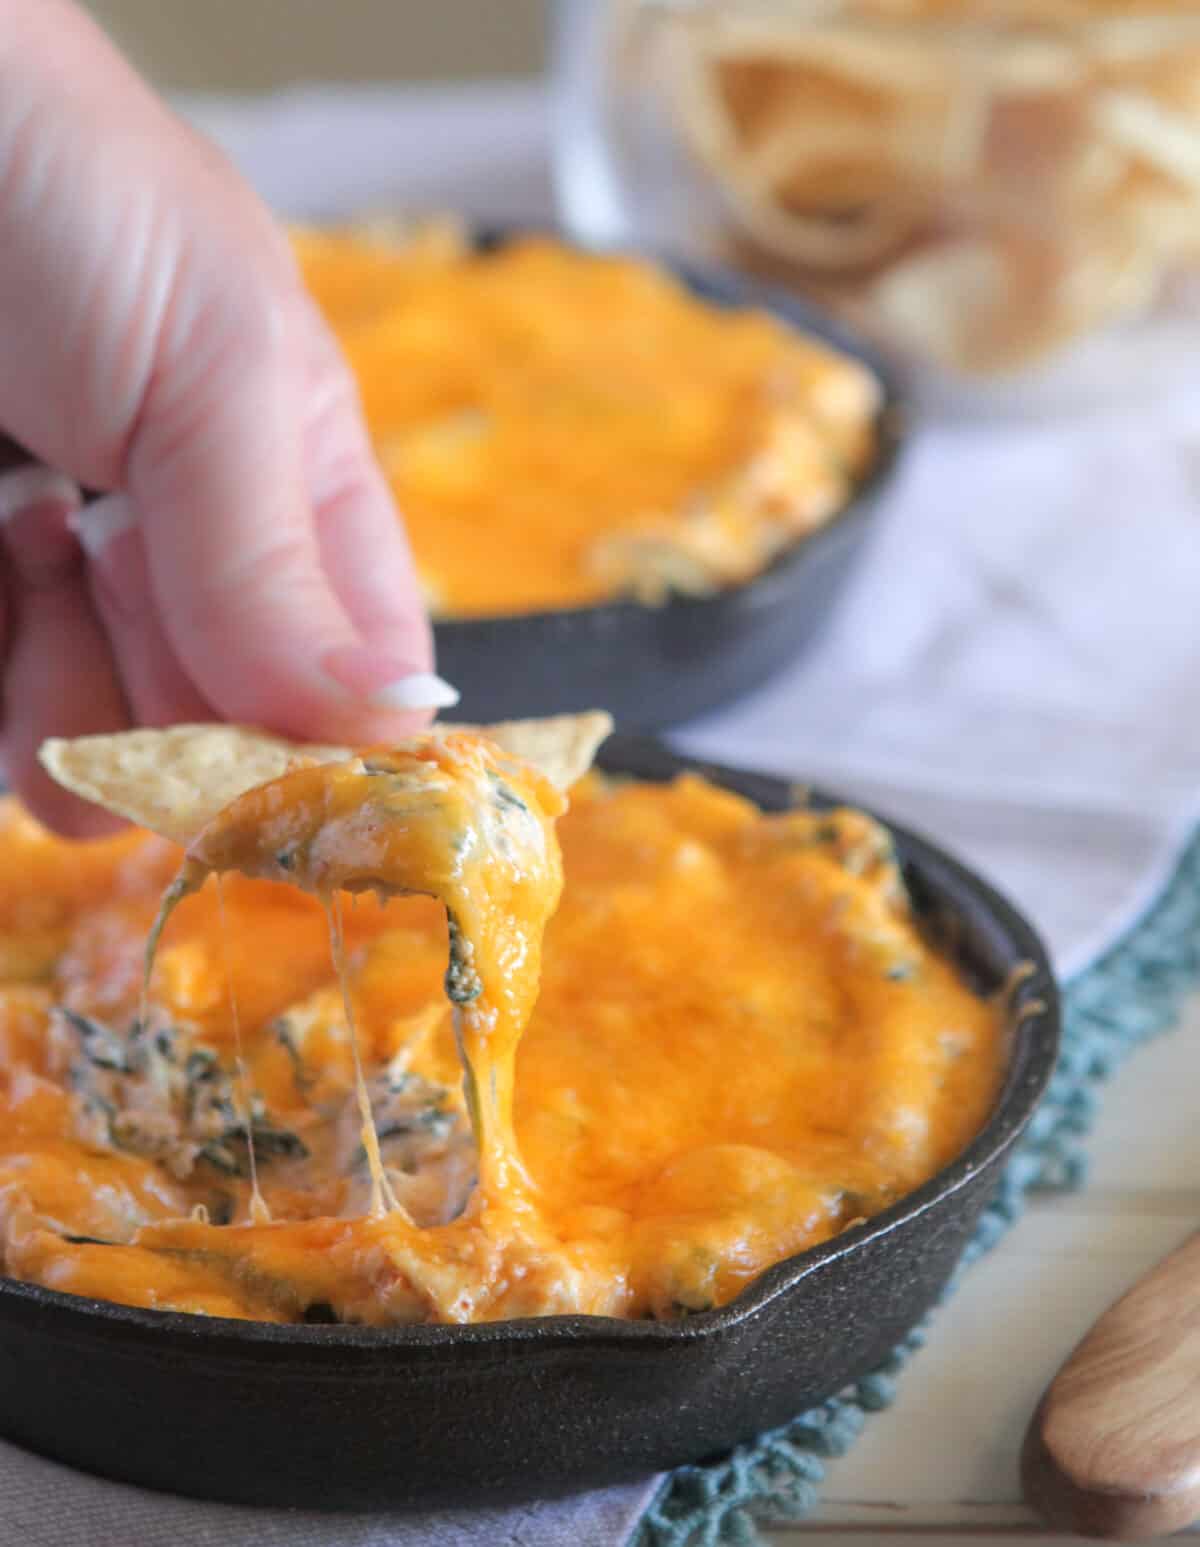 dipping chip in spinach dip